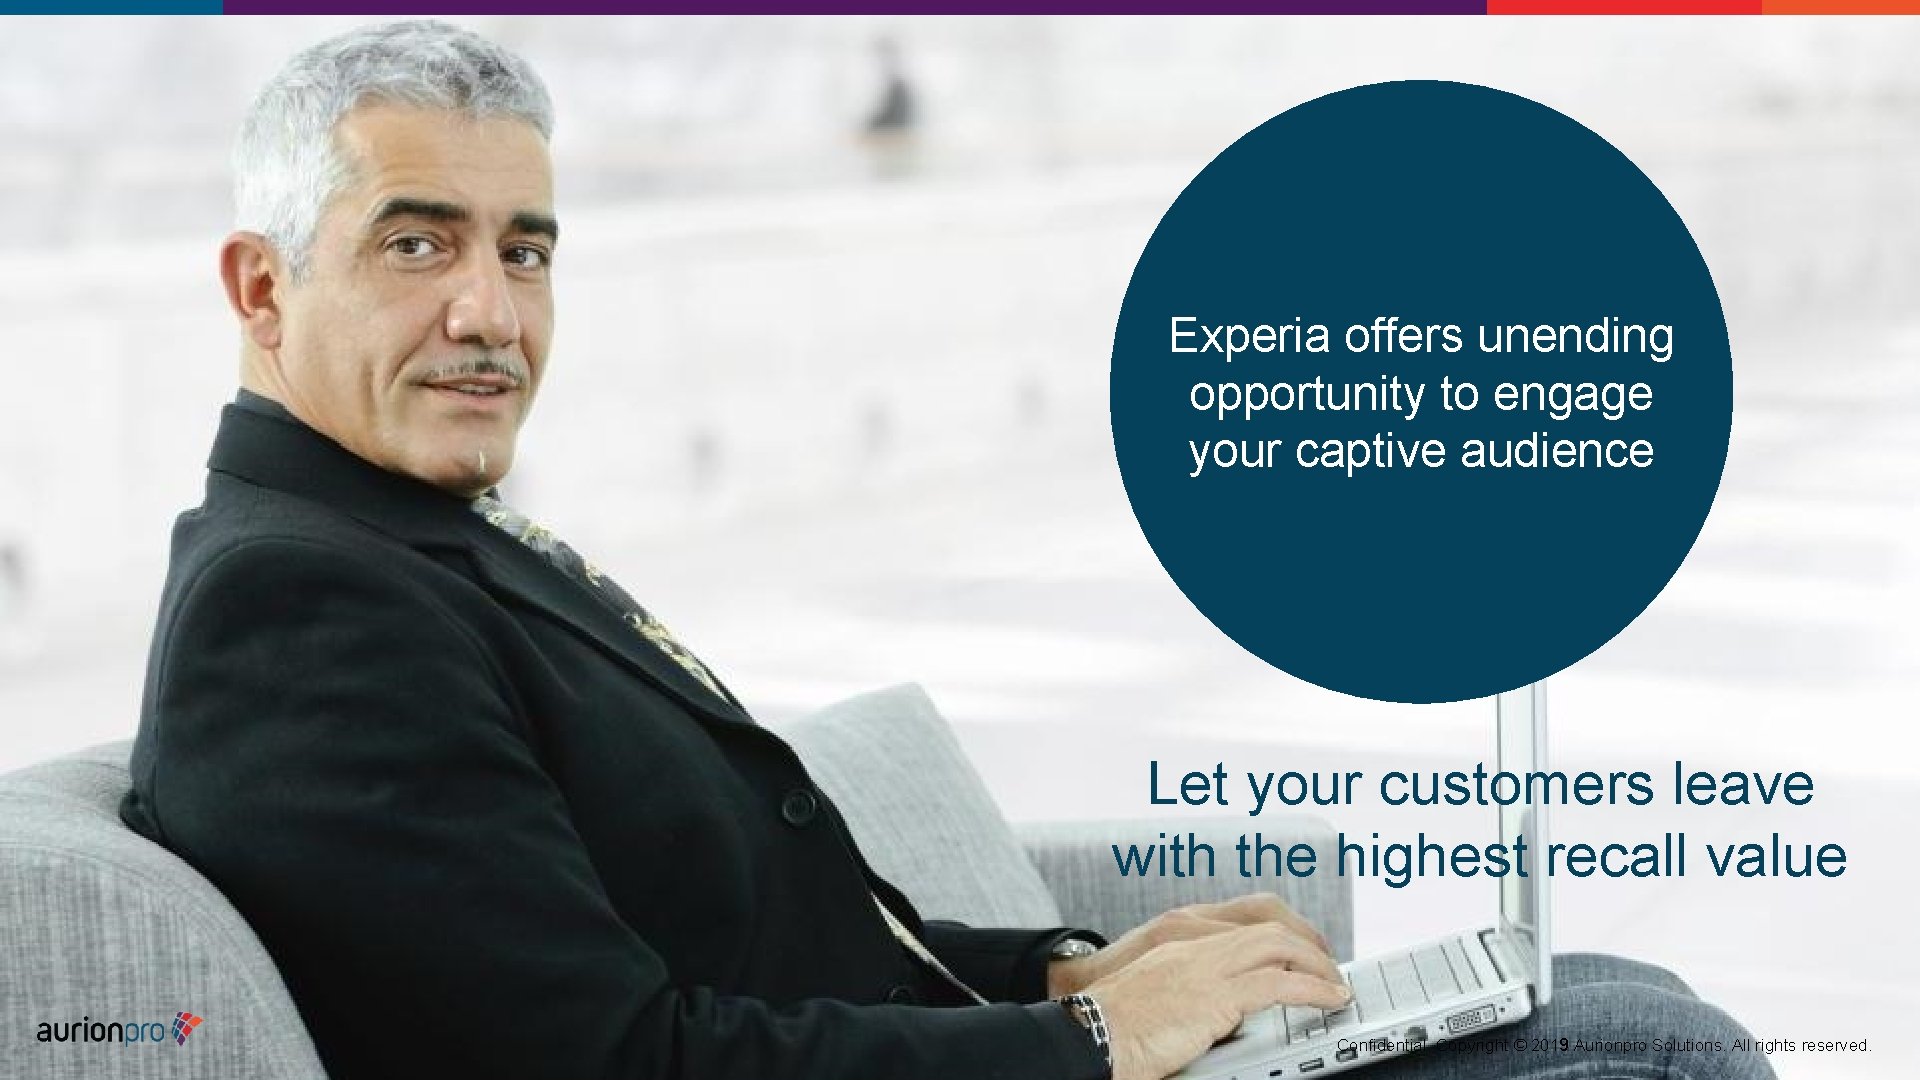 Experia offers unending opportunity to engage your captive audience Let your customers leave with